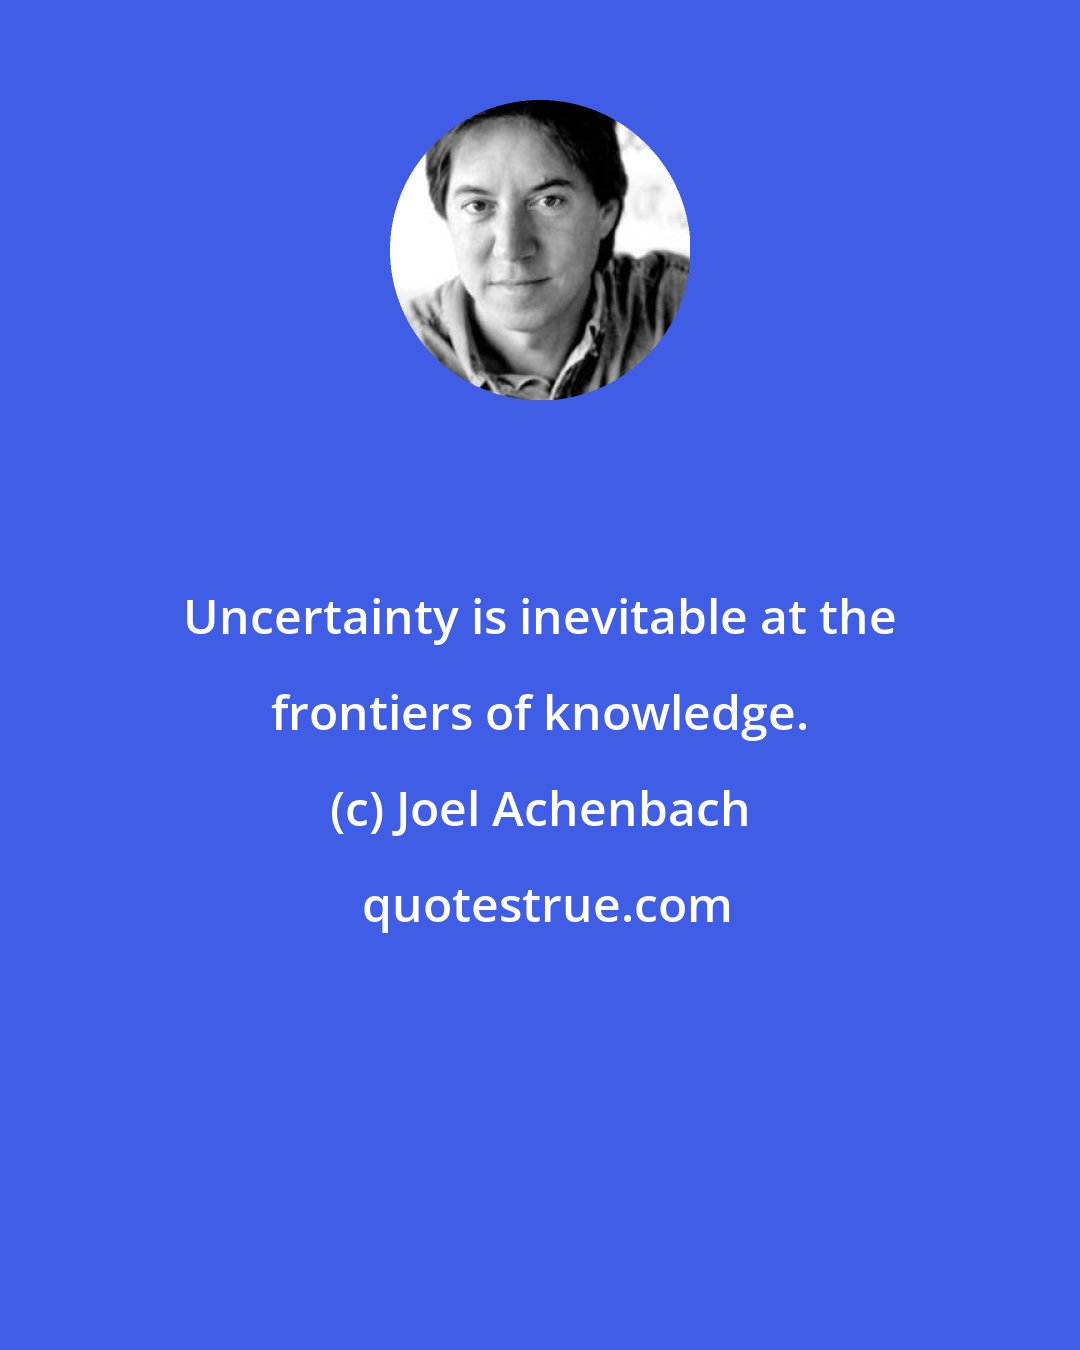 Joel Achenbach: Uncertainty is inevitable at the frontiers of knowledge.